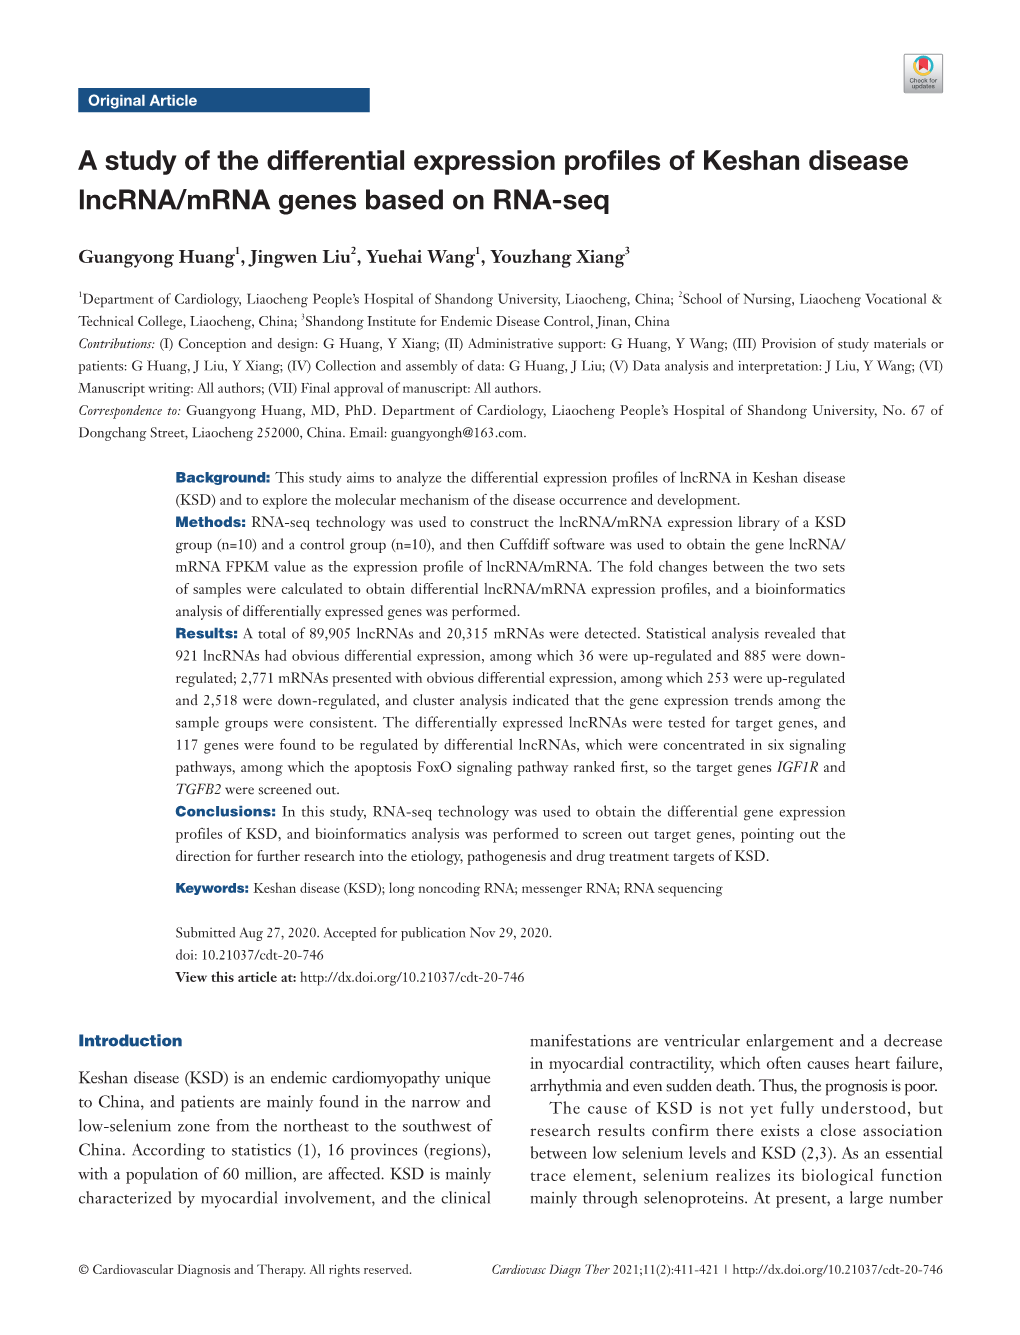 A Study of the Differential Expression Profiles of Keshan Disease Lncrna/Mrna Genes Based on RNA-Seq